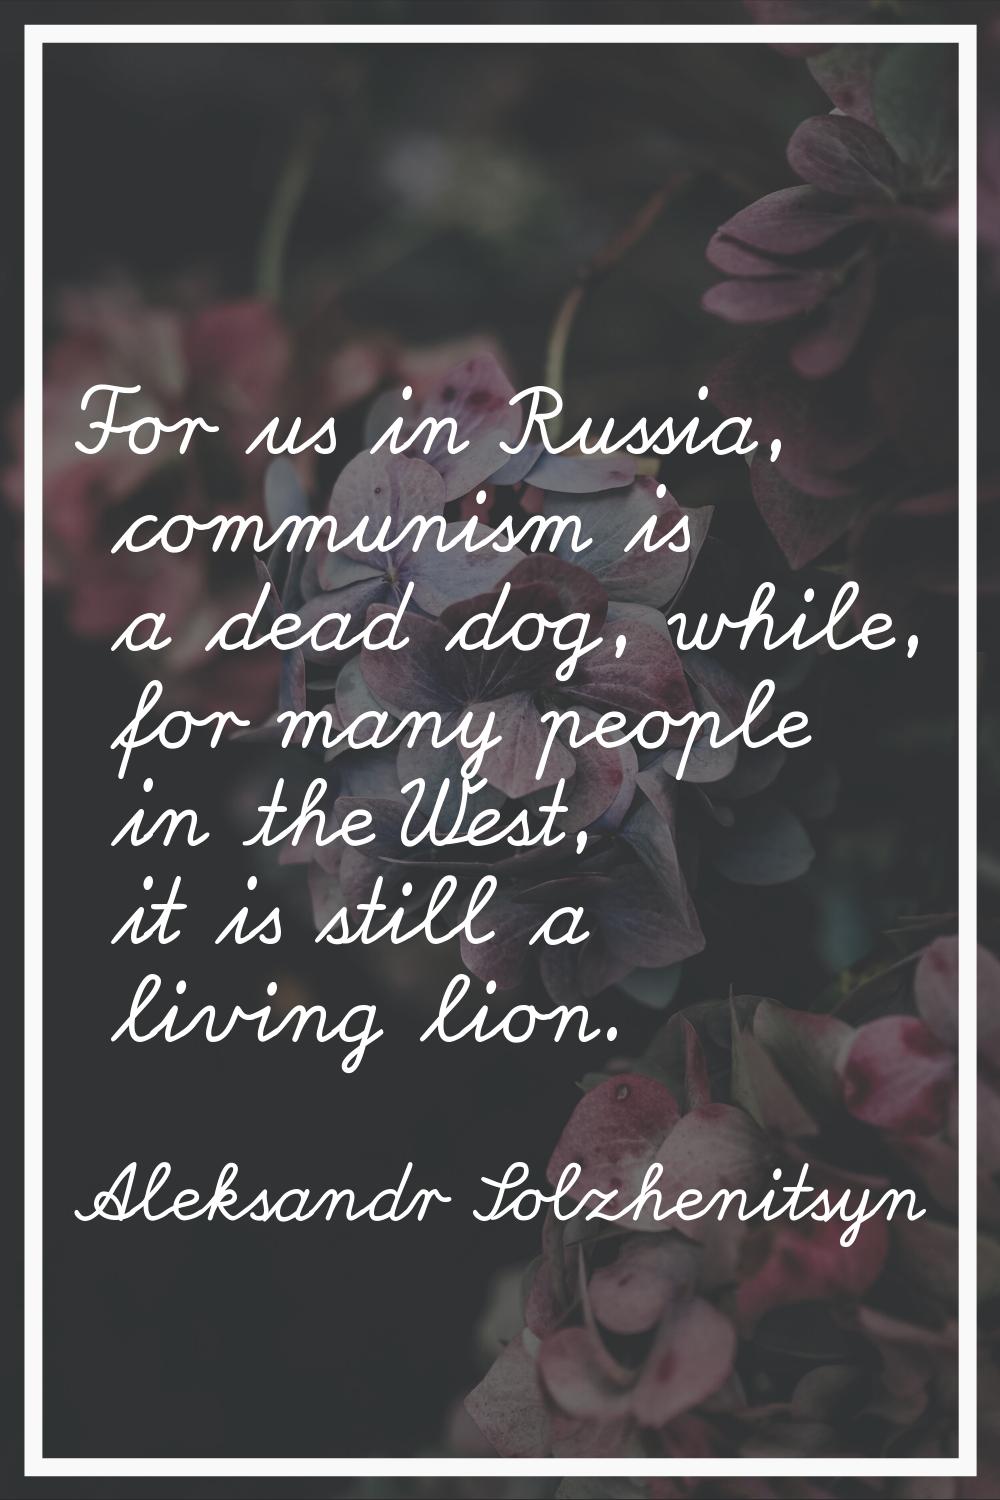 For us in Russia, communism is a dead dog, while, for many people in the West, it is still a living